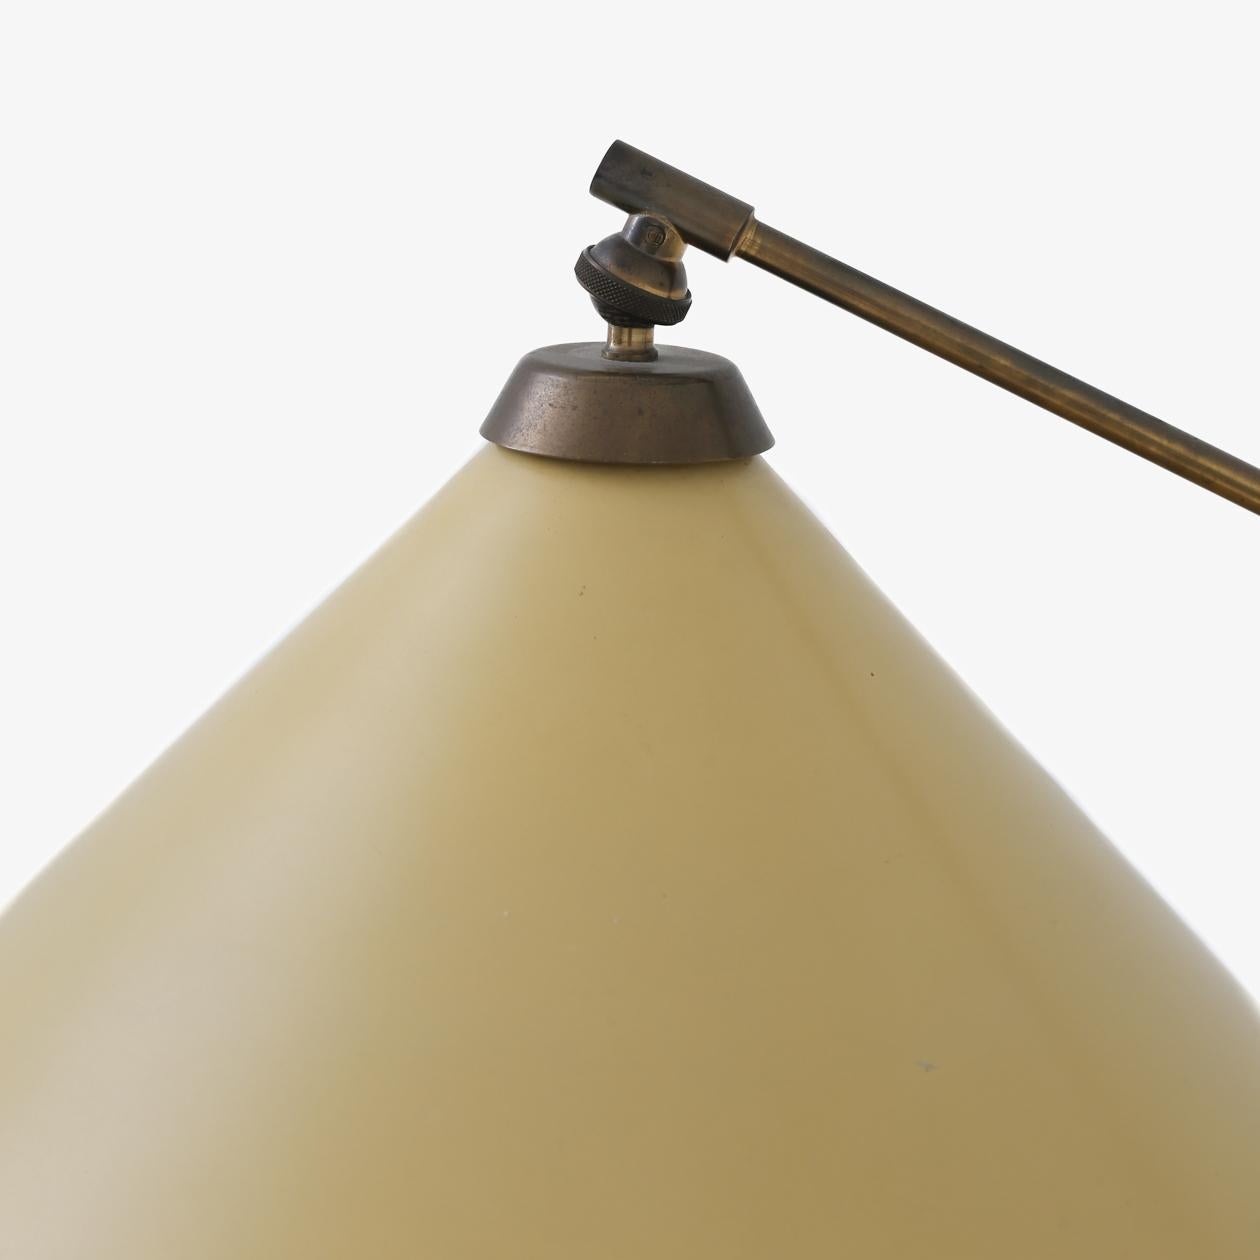 THV 376 - Floor lamp in brass and yellow lacquered metal shade with adjustable height. Th. Valentiner / Poul Dinesen.